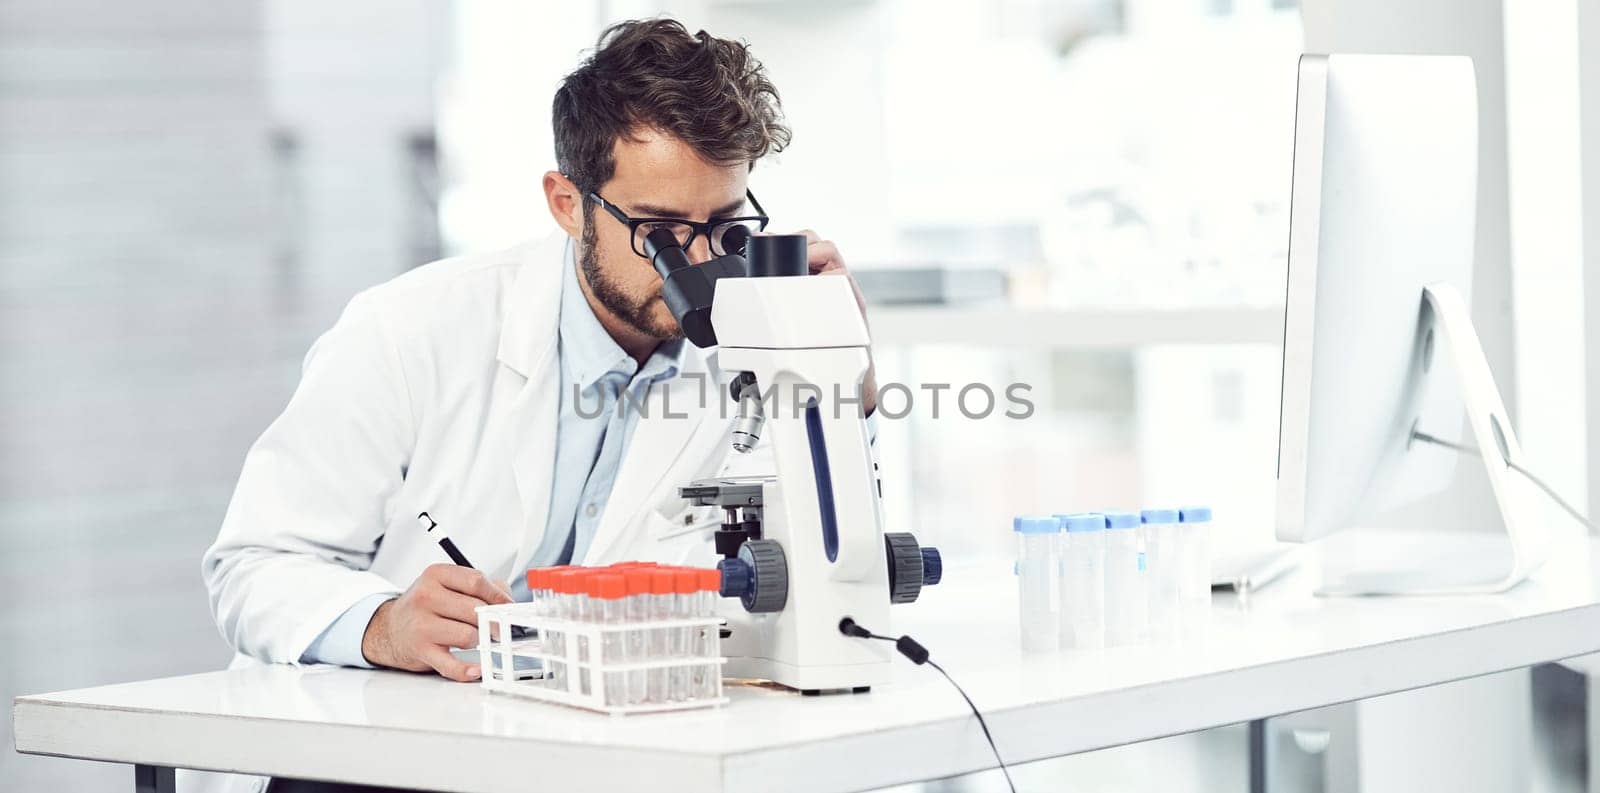 Doing what medical professionals do best. a focused young male scientist making notes while looking trough a microscope and being seated inside a laboratory